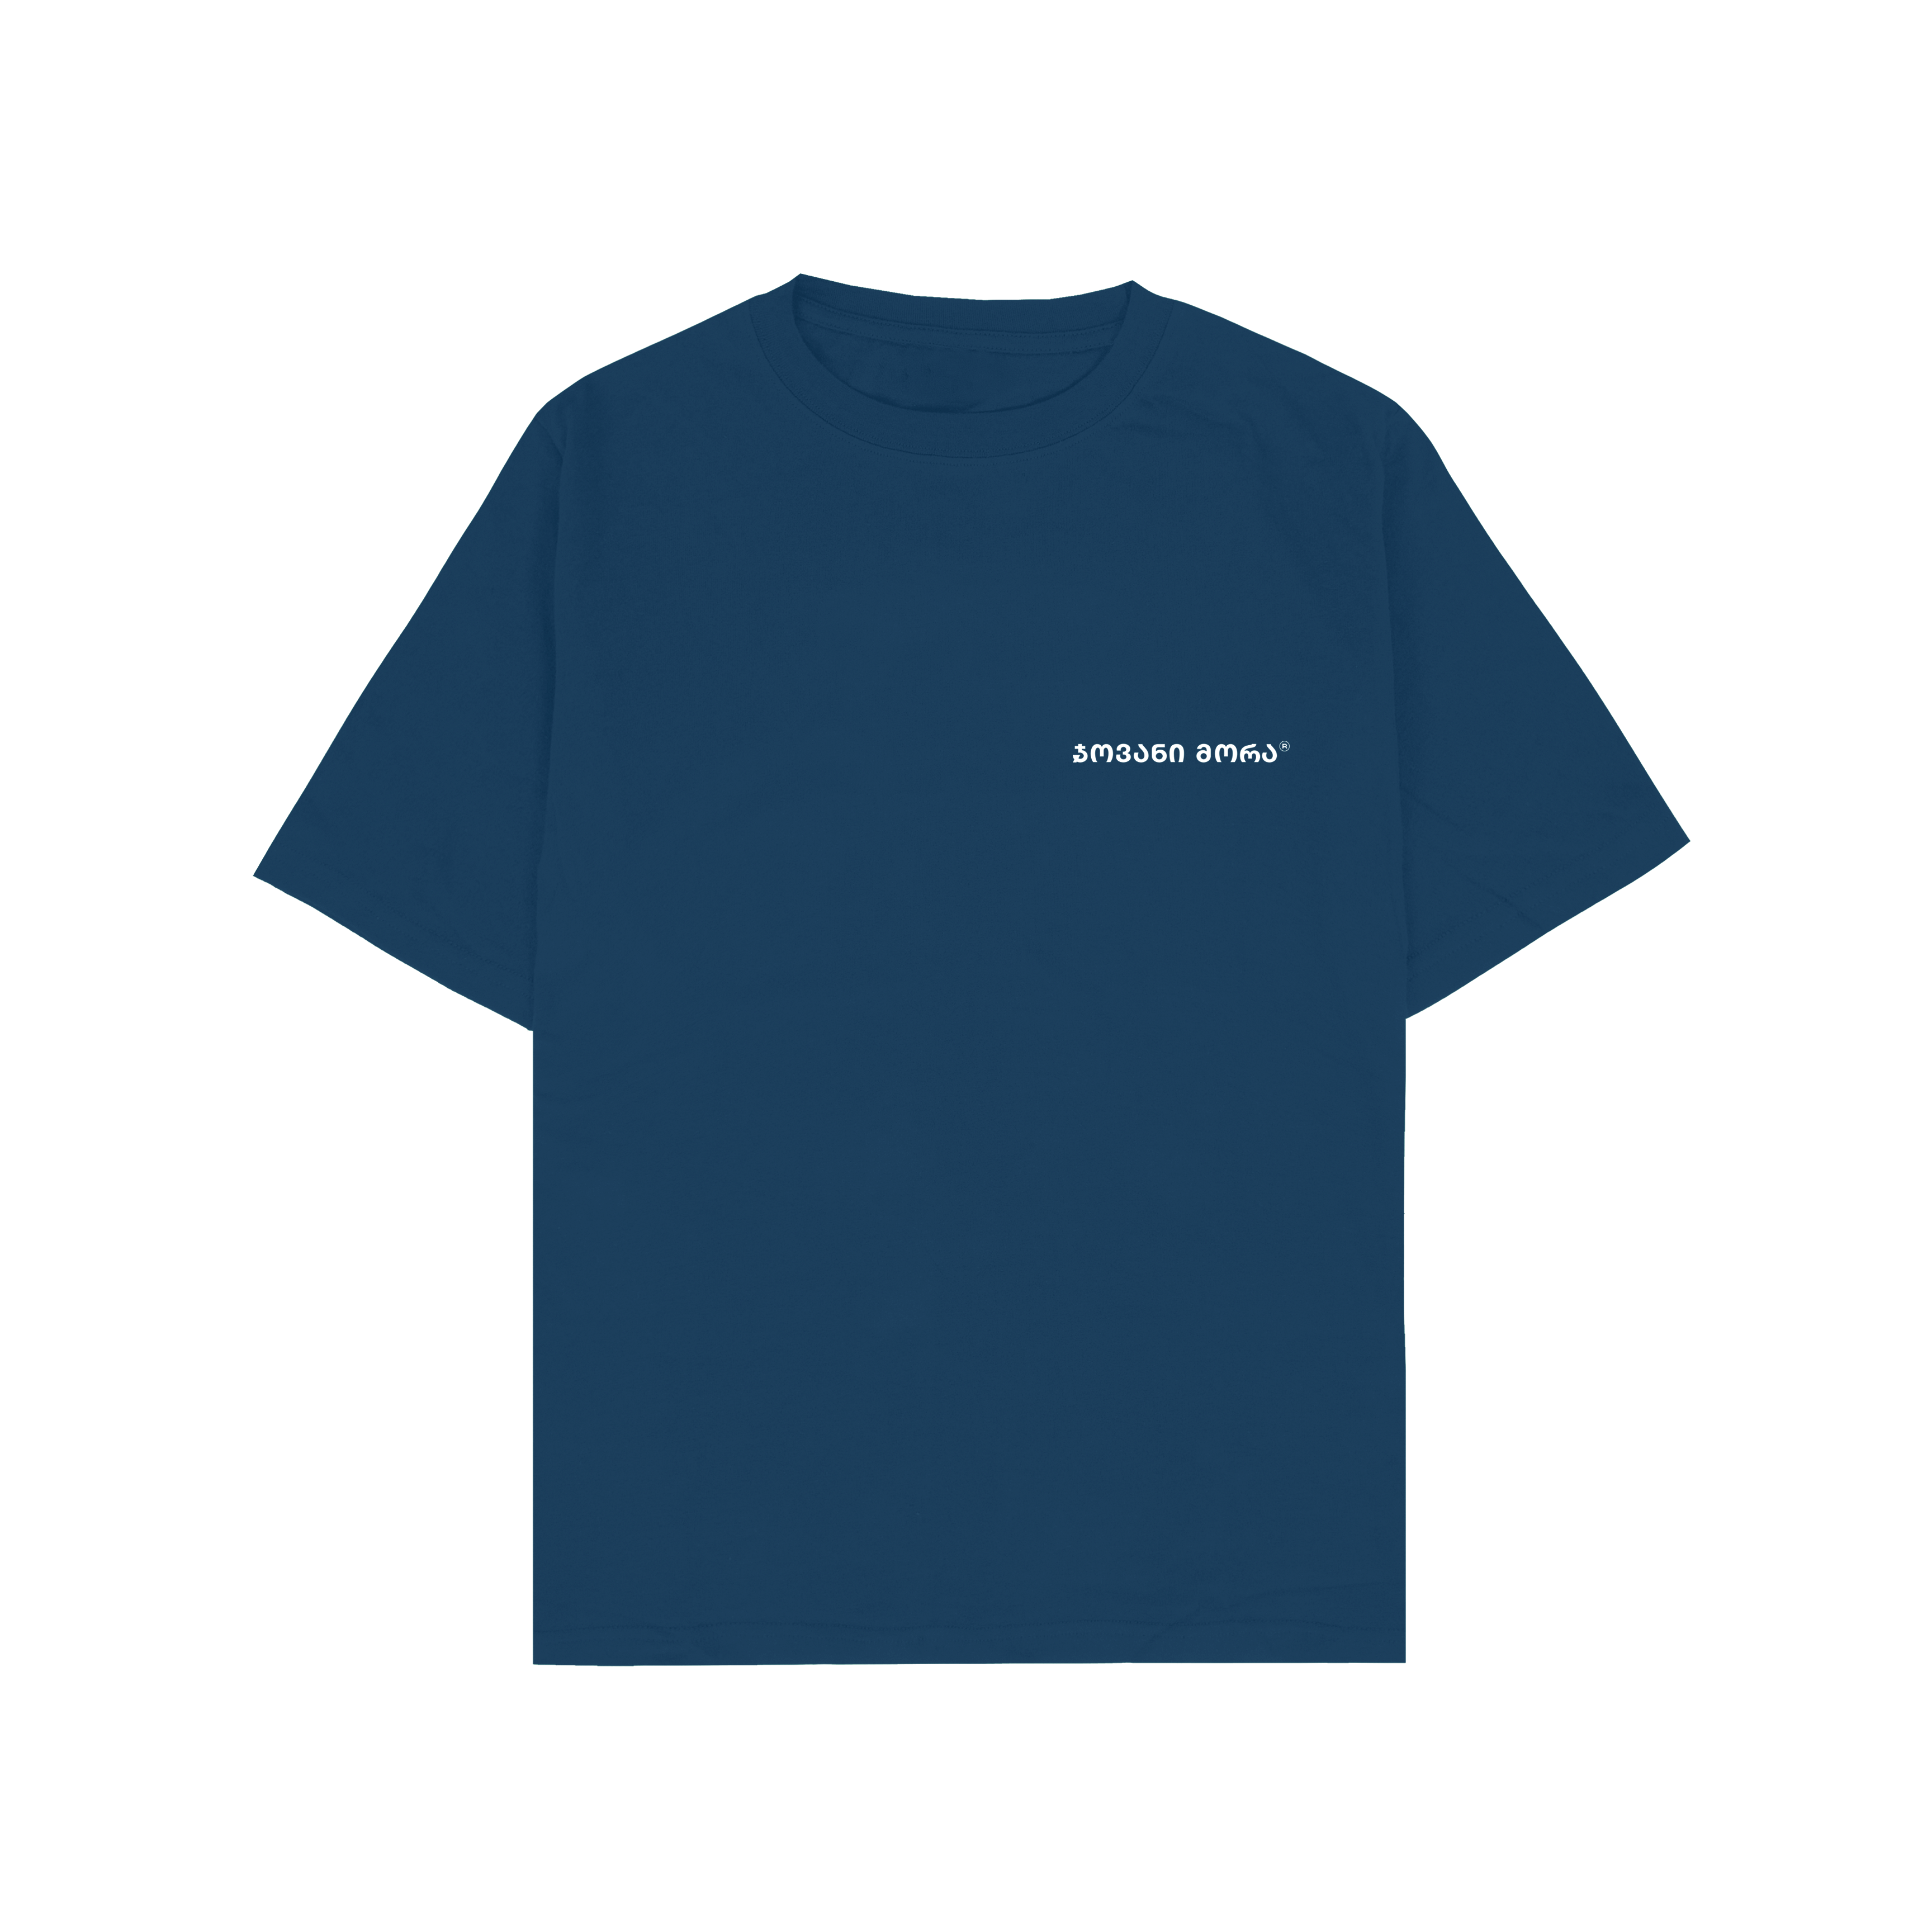 T-shirt (Dark Blue), Relaxed Fit